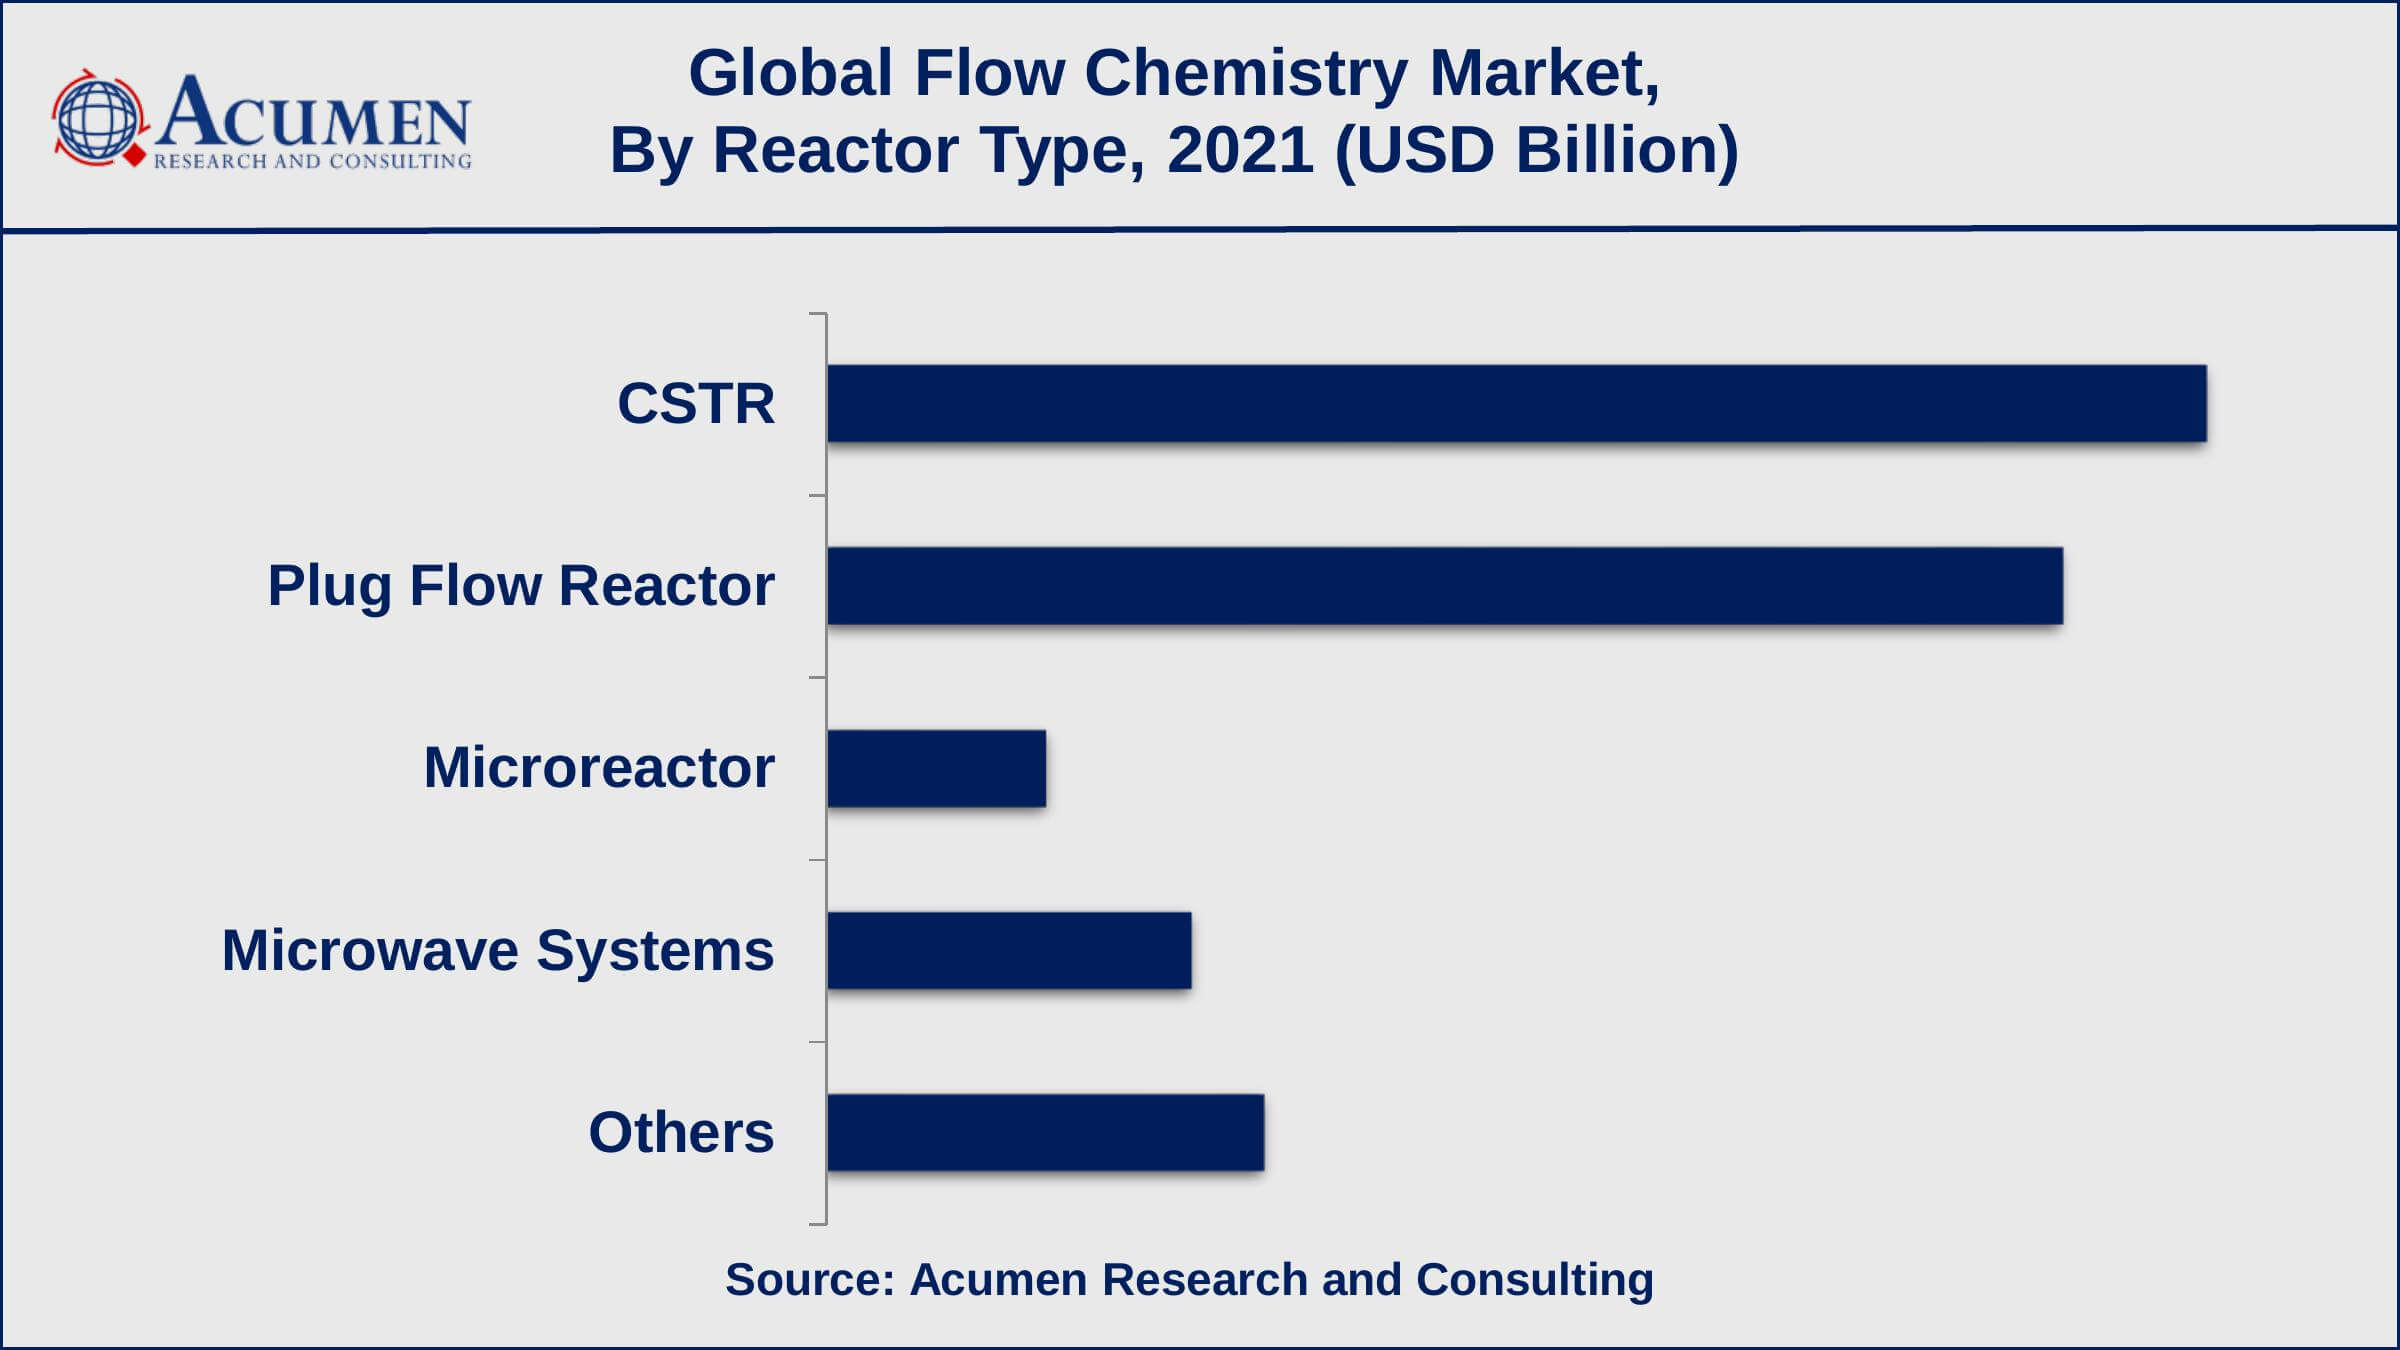 Based on reactor type, CSTR recorded 38% of the overall market share in 2021